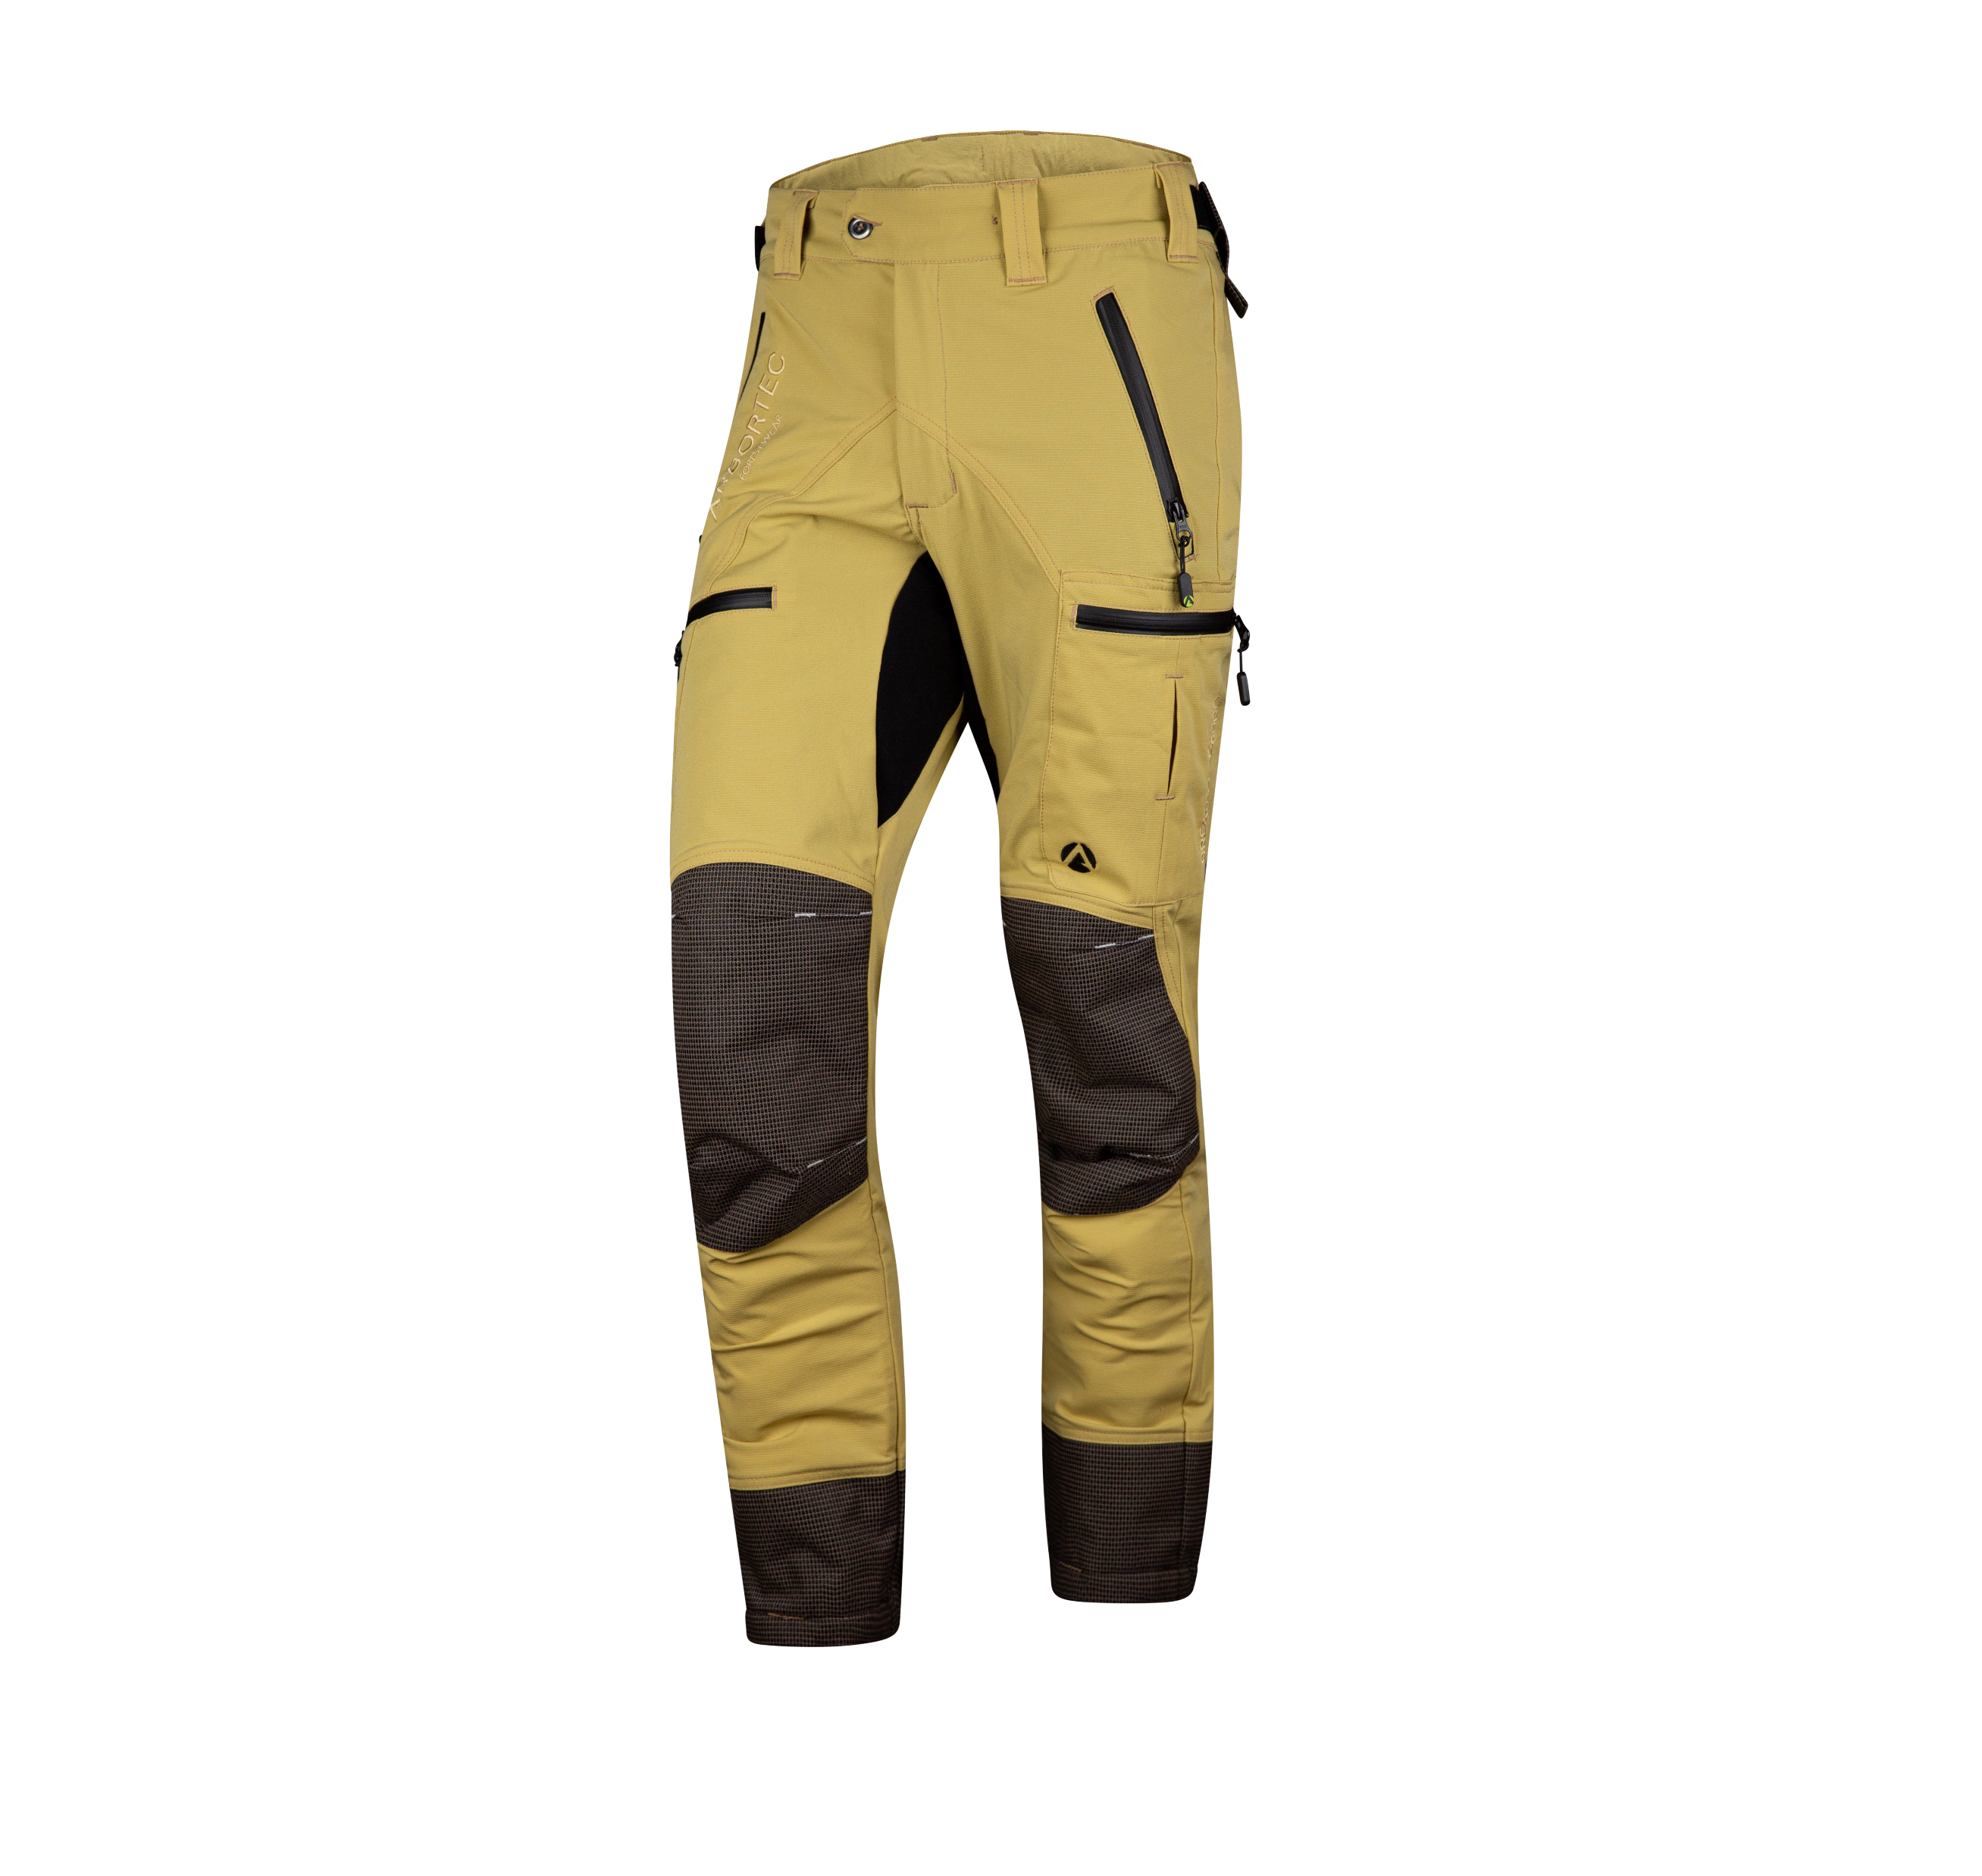 AT4160 Breatheflex Pro Trousers Non-Protective - Beige